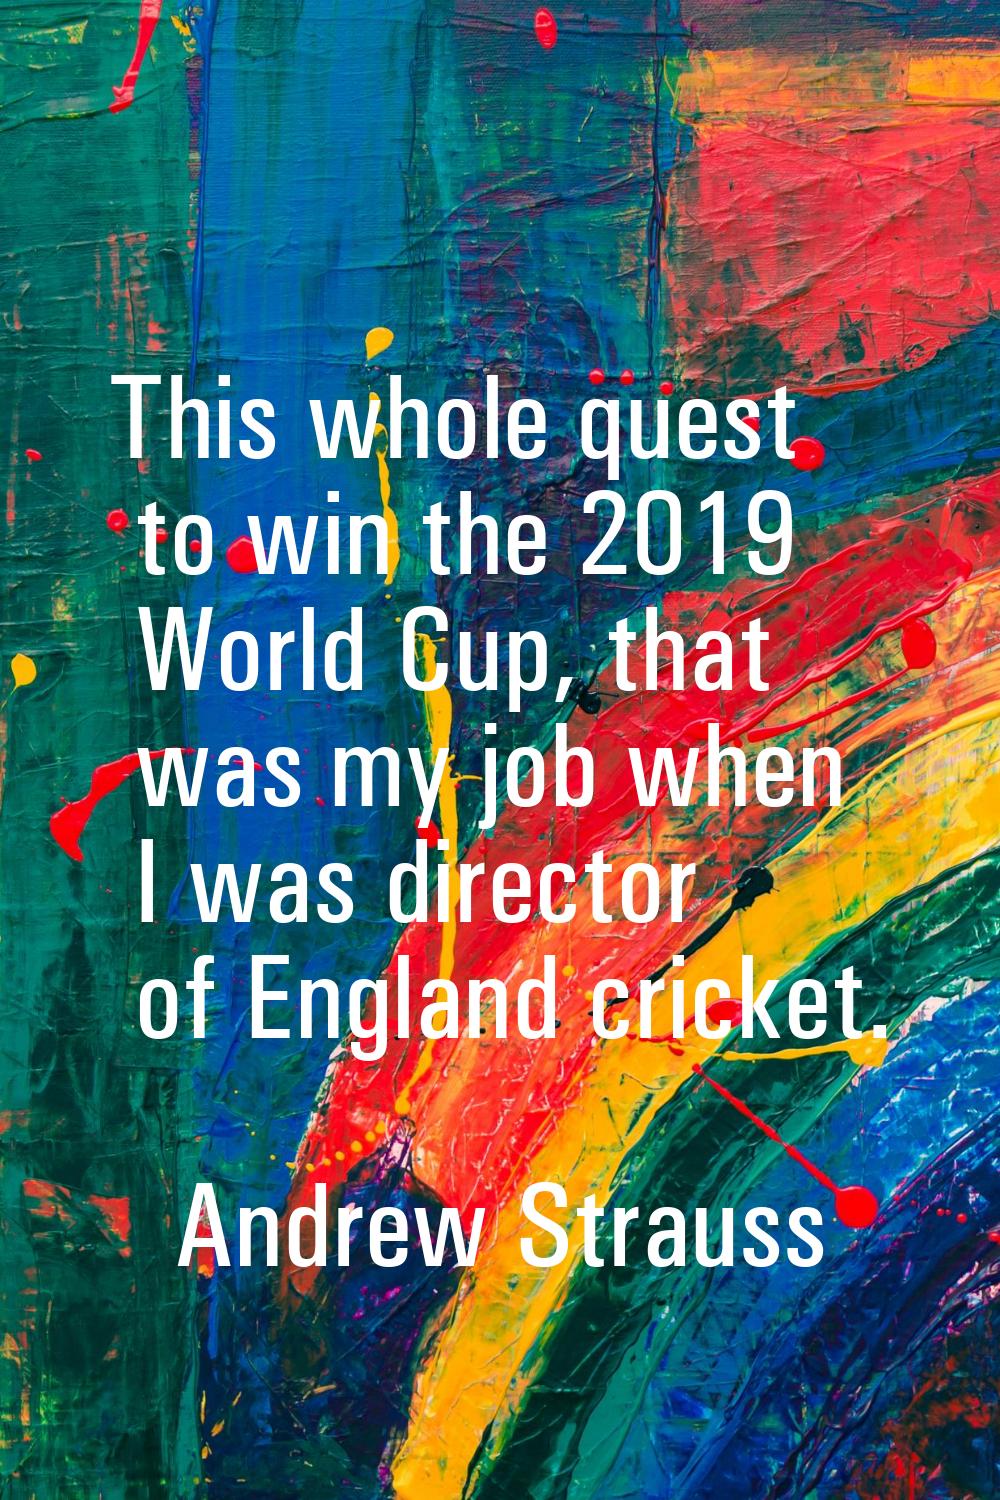 This whole quest to win the 2019 World Cup, that was my job when I was director of England cricket.